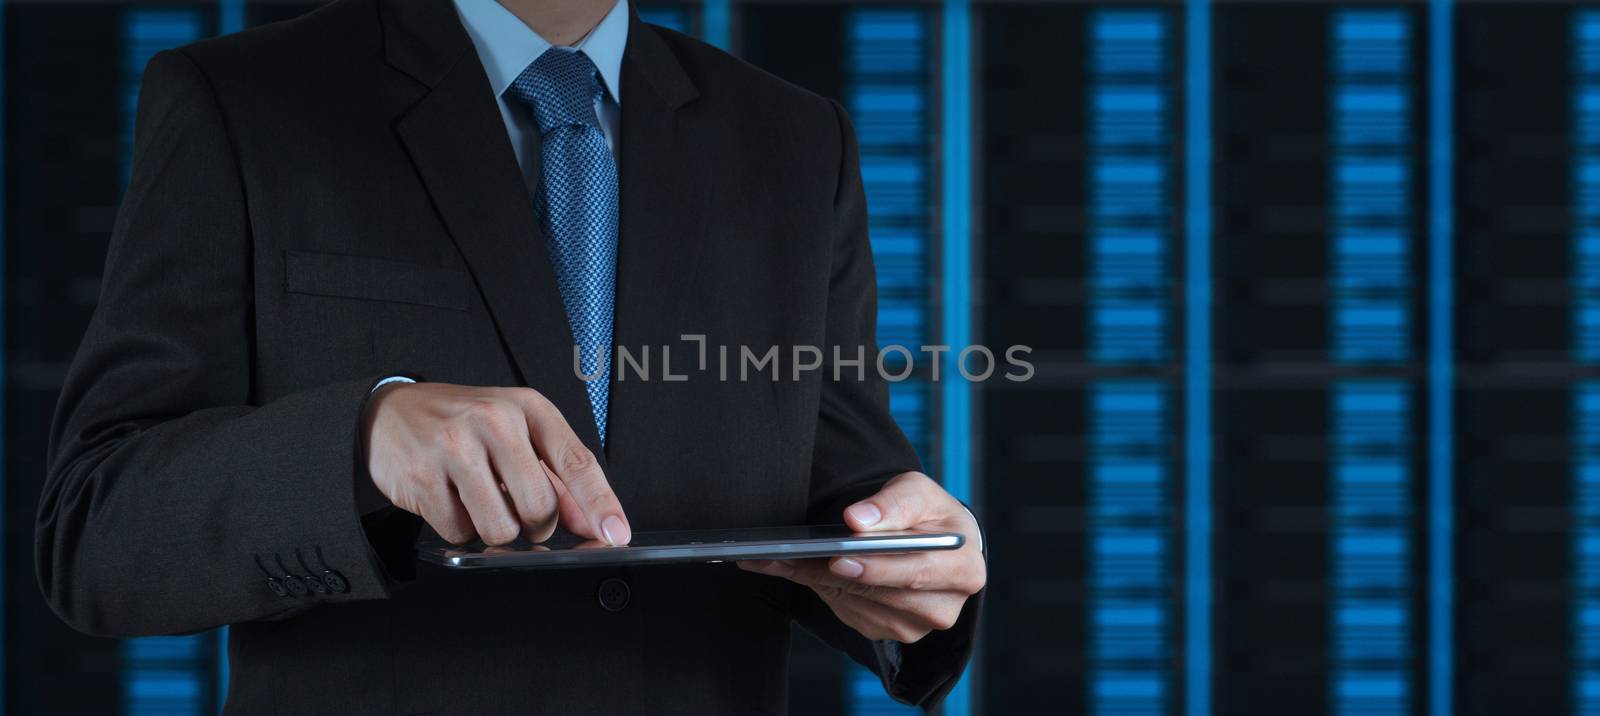 businessman hand using tablet computer and server room background